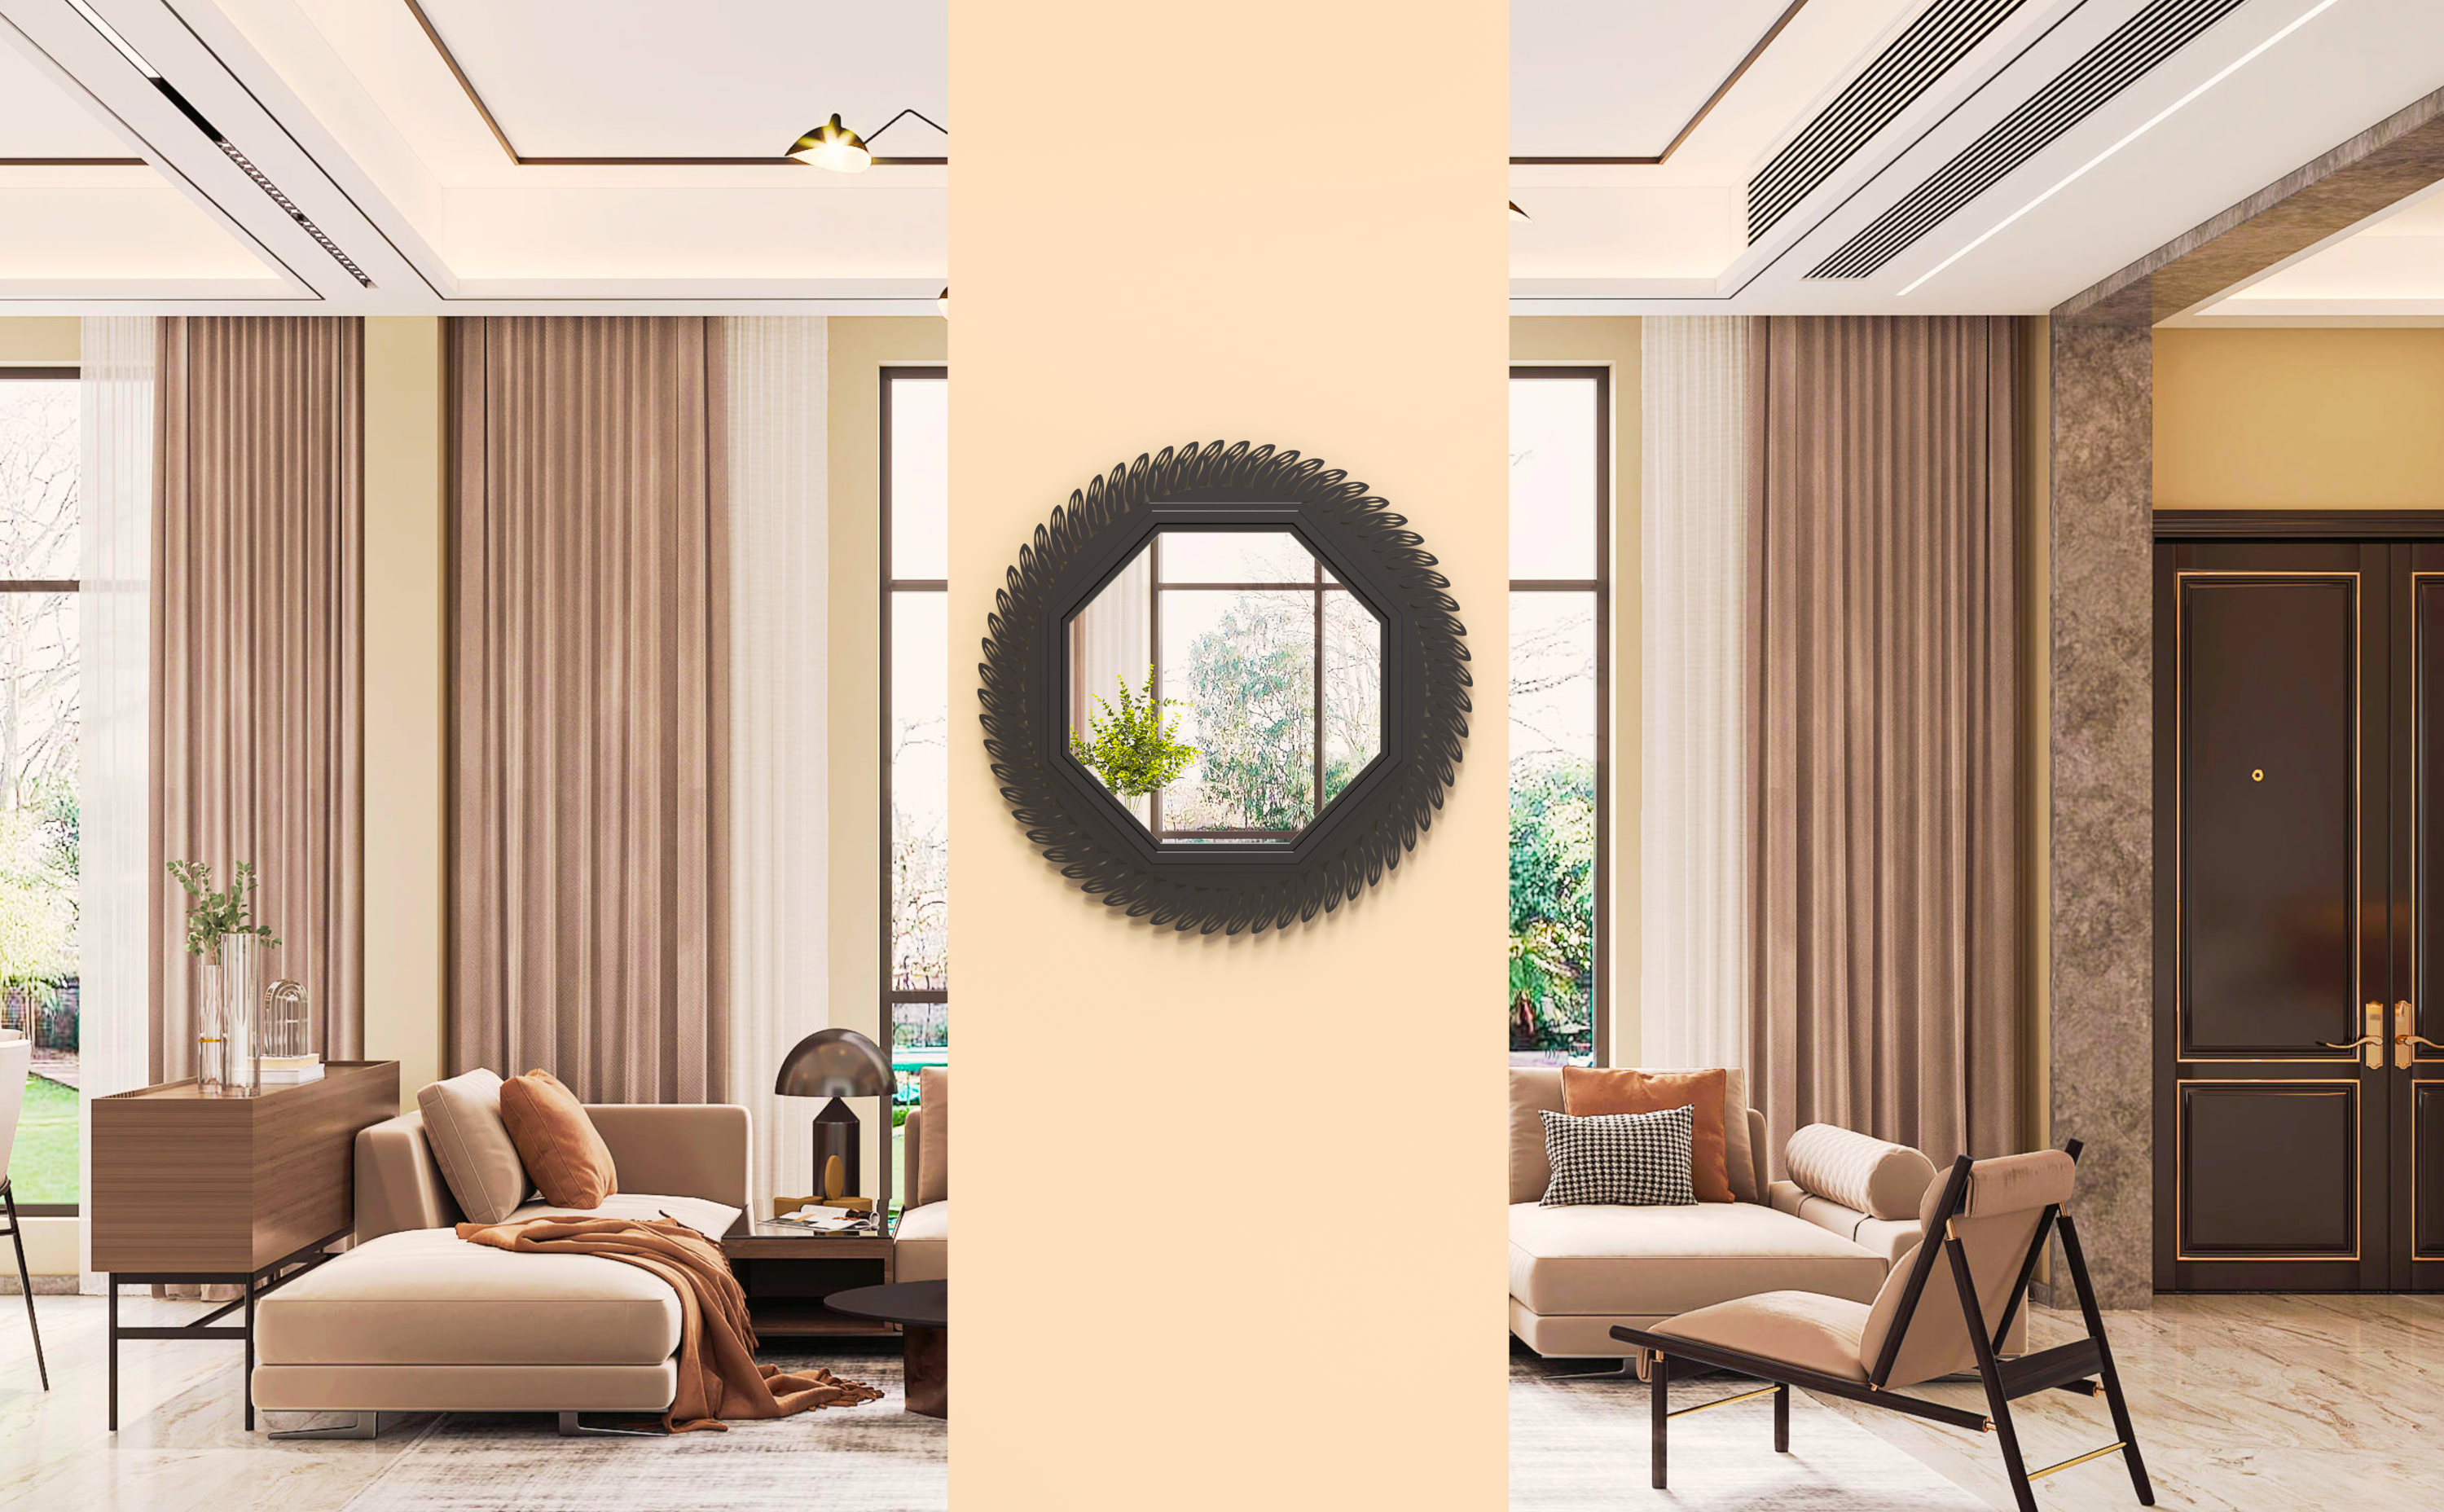 24"x24" Black Decorative Wall Mirror for Home, Octagonal Geometric Mirror with Metal Frame,Modern Hanging Mirrors for Living Room,Bedroom Entryway